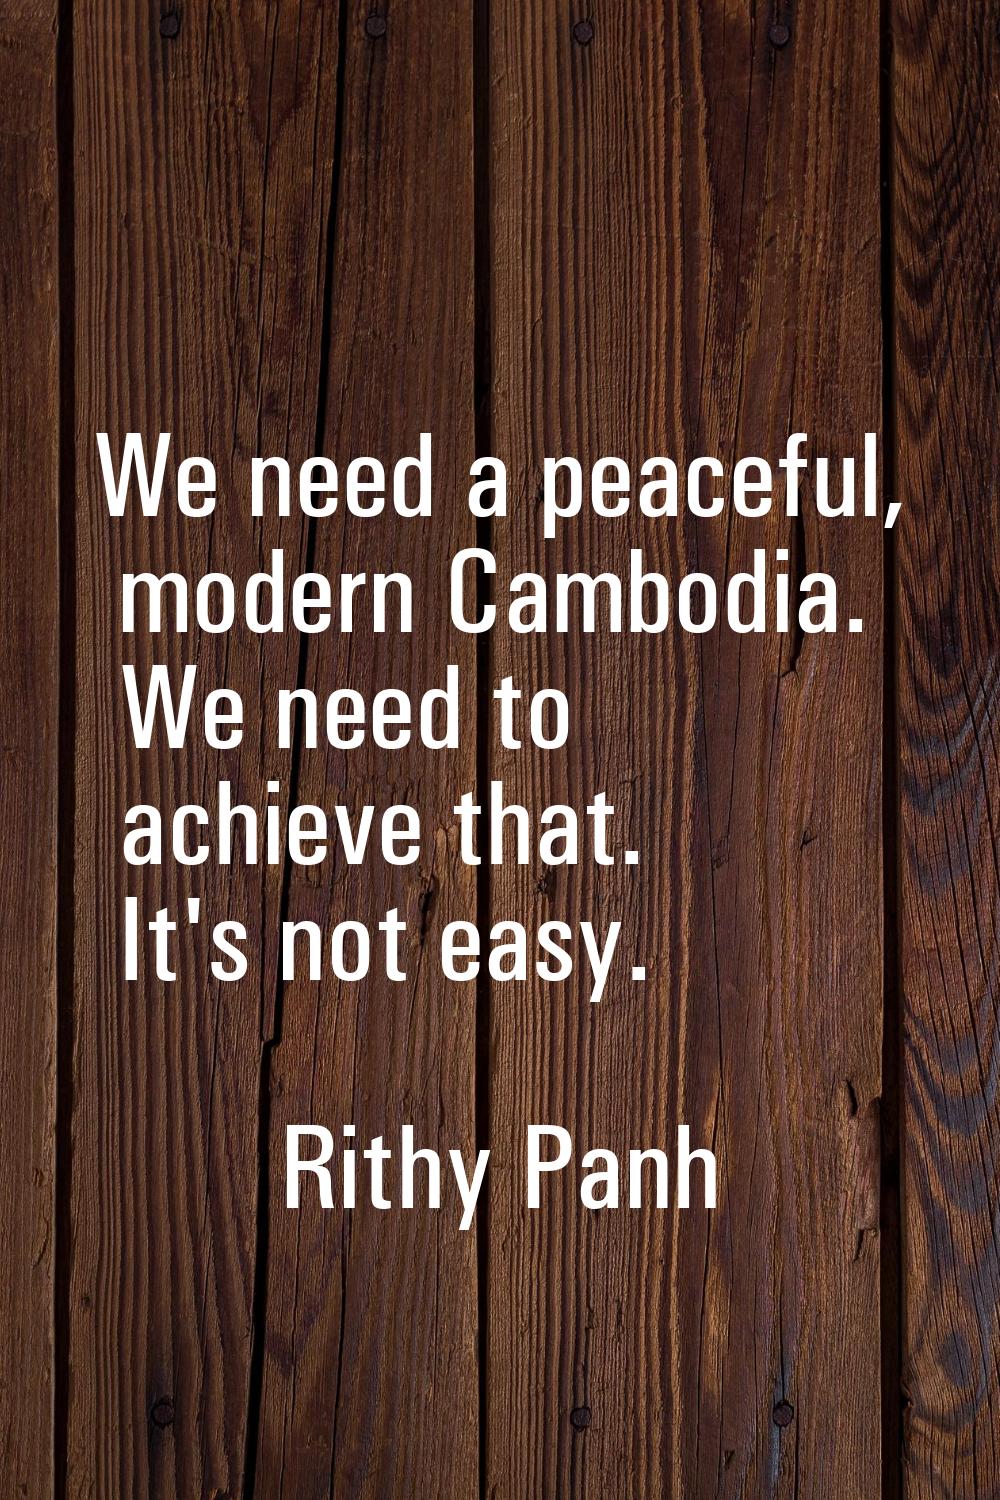 We need a peaceful, modern Cambodia. We need to achieve that. It's not easy.